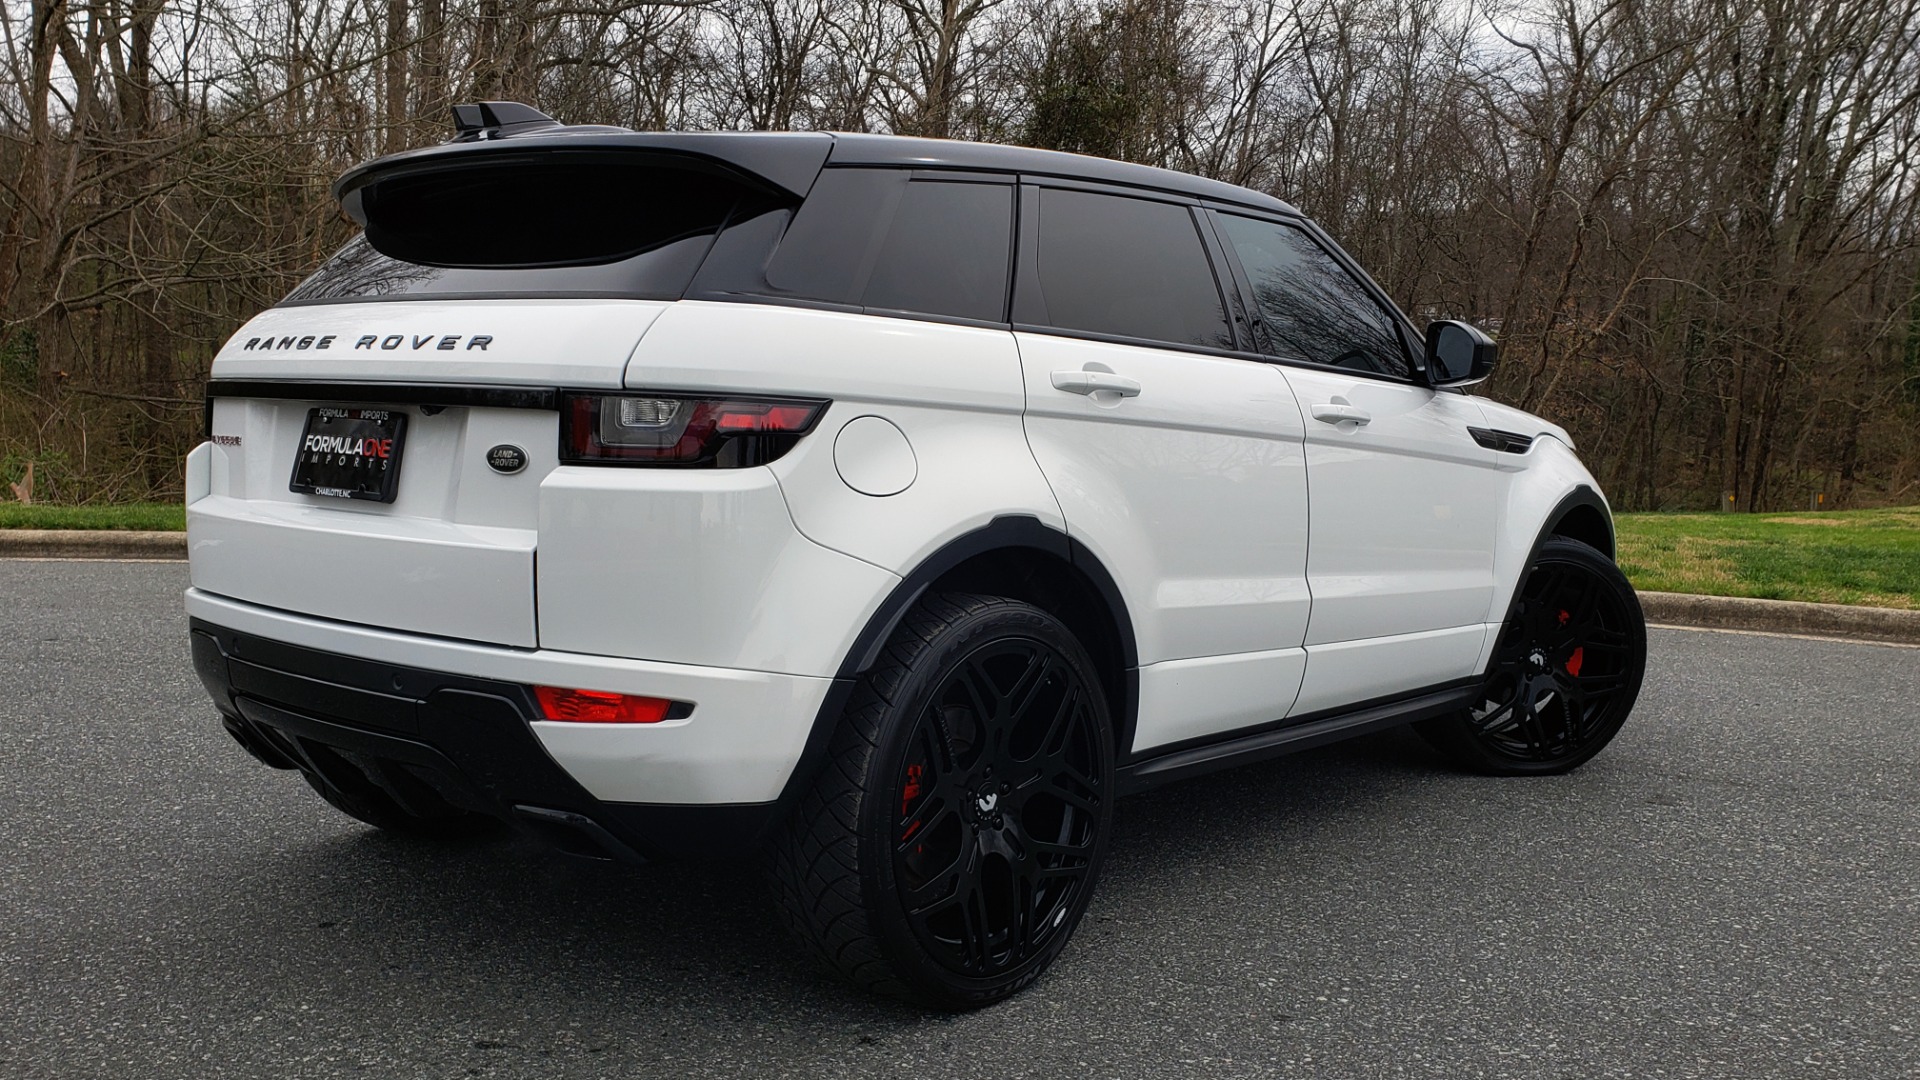 Used 2016 Land Rover RANGE ROVER EVOQUE HSE DYNAMIC / AWD / NAV / PANO-ROOF / REARVIEW / 22-IN WHEELS for sale Sold at Formula Imports in Charlotte NC 28227 7